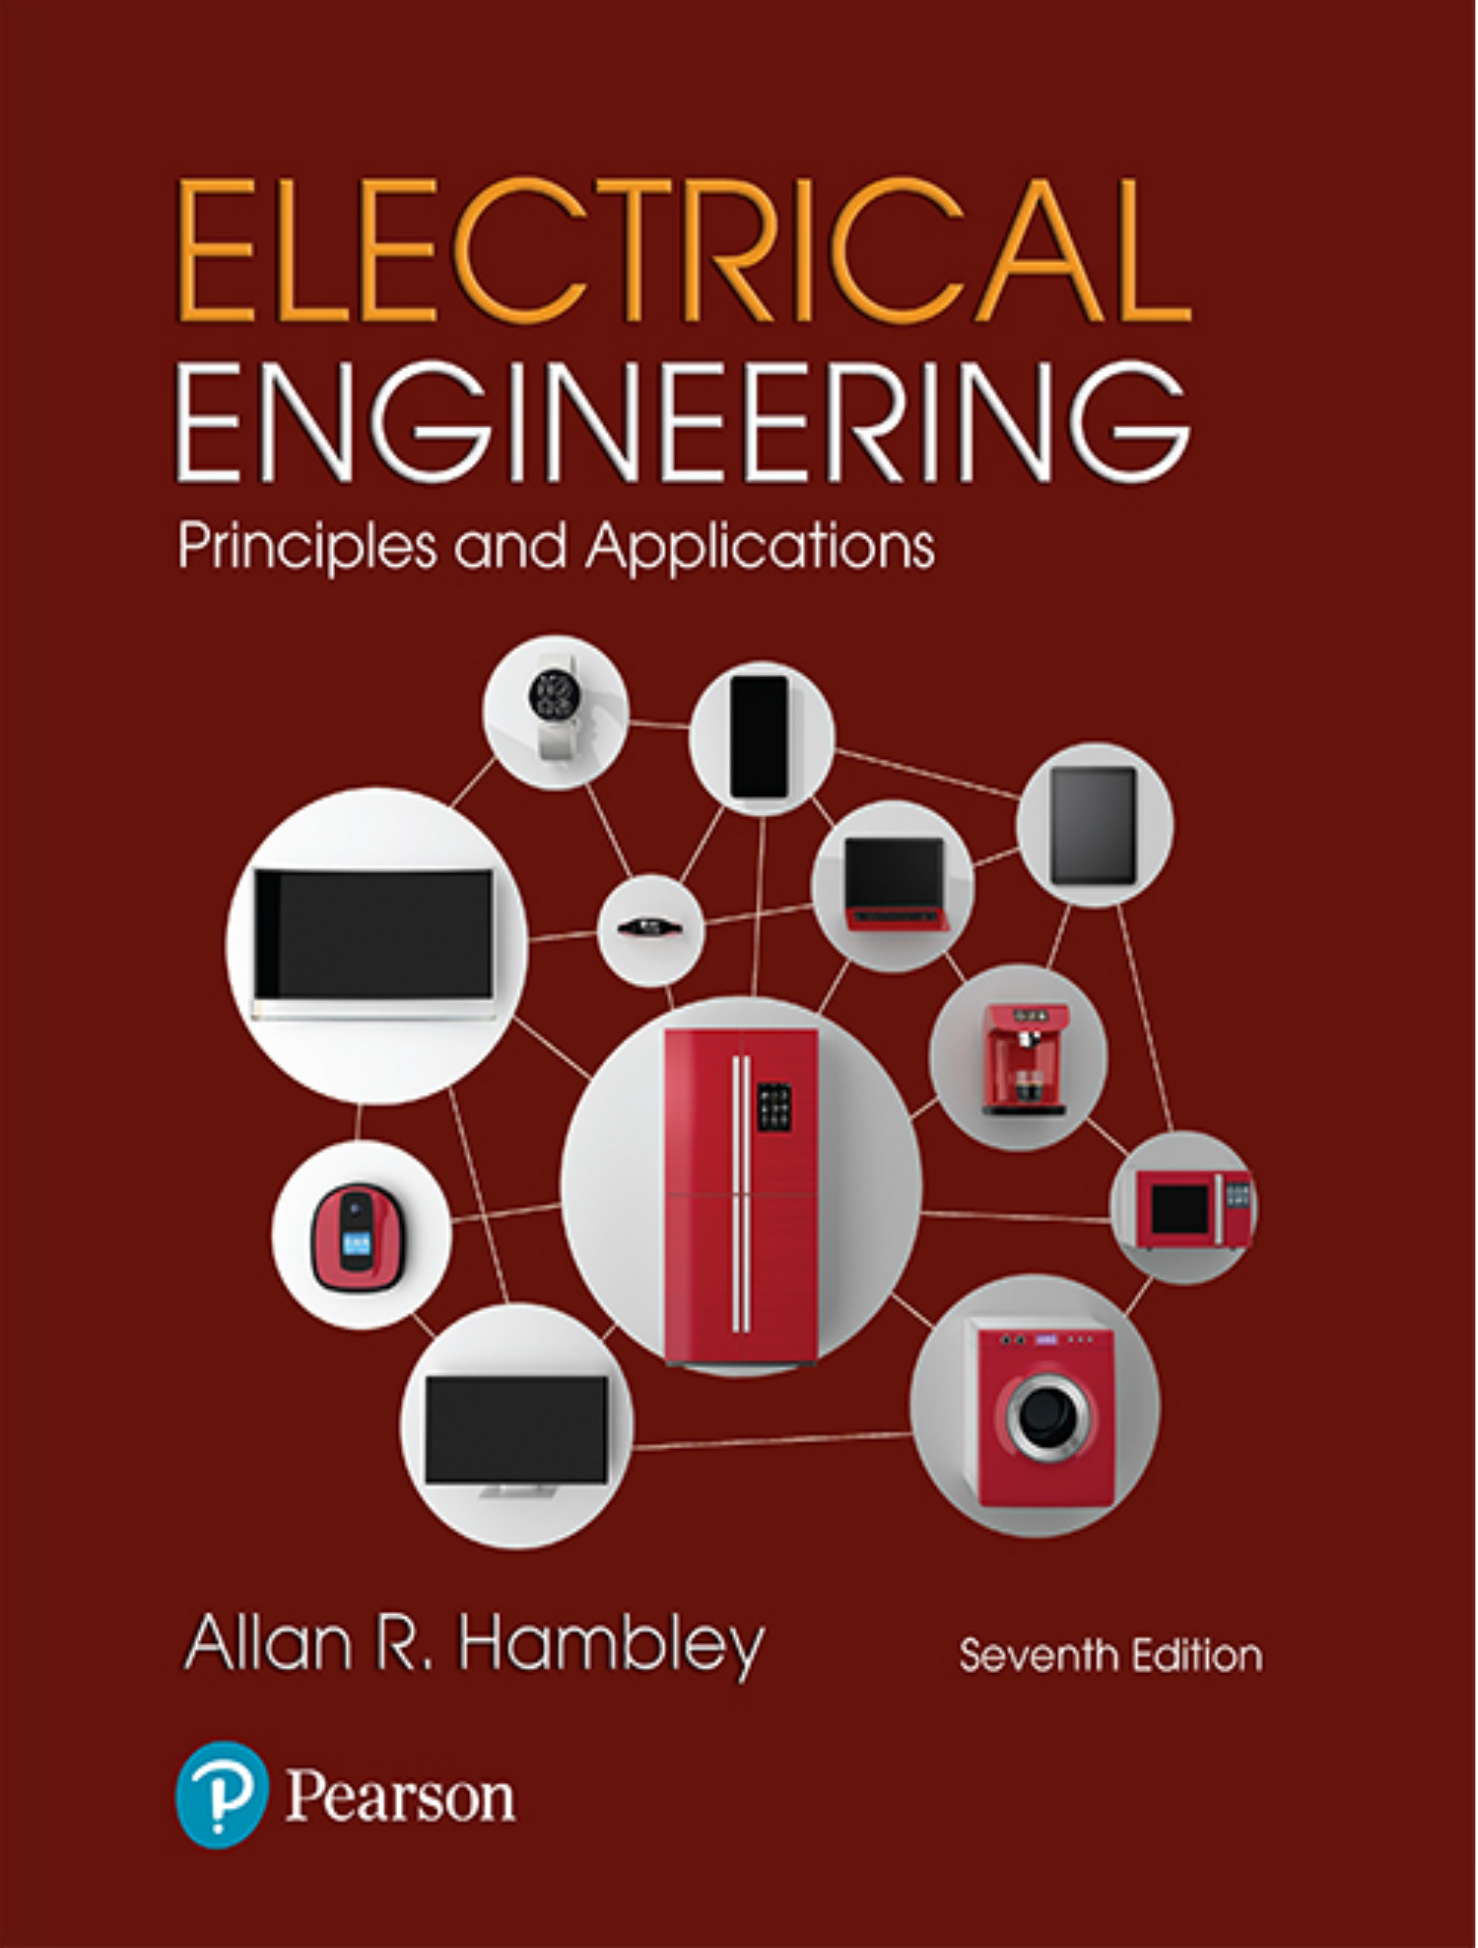 Electrical Engineering Principles and Applications 7th Edition PDF Free Download